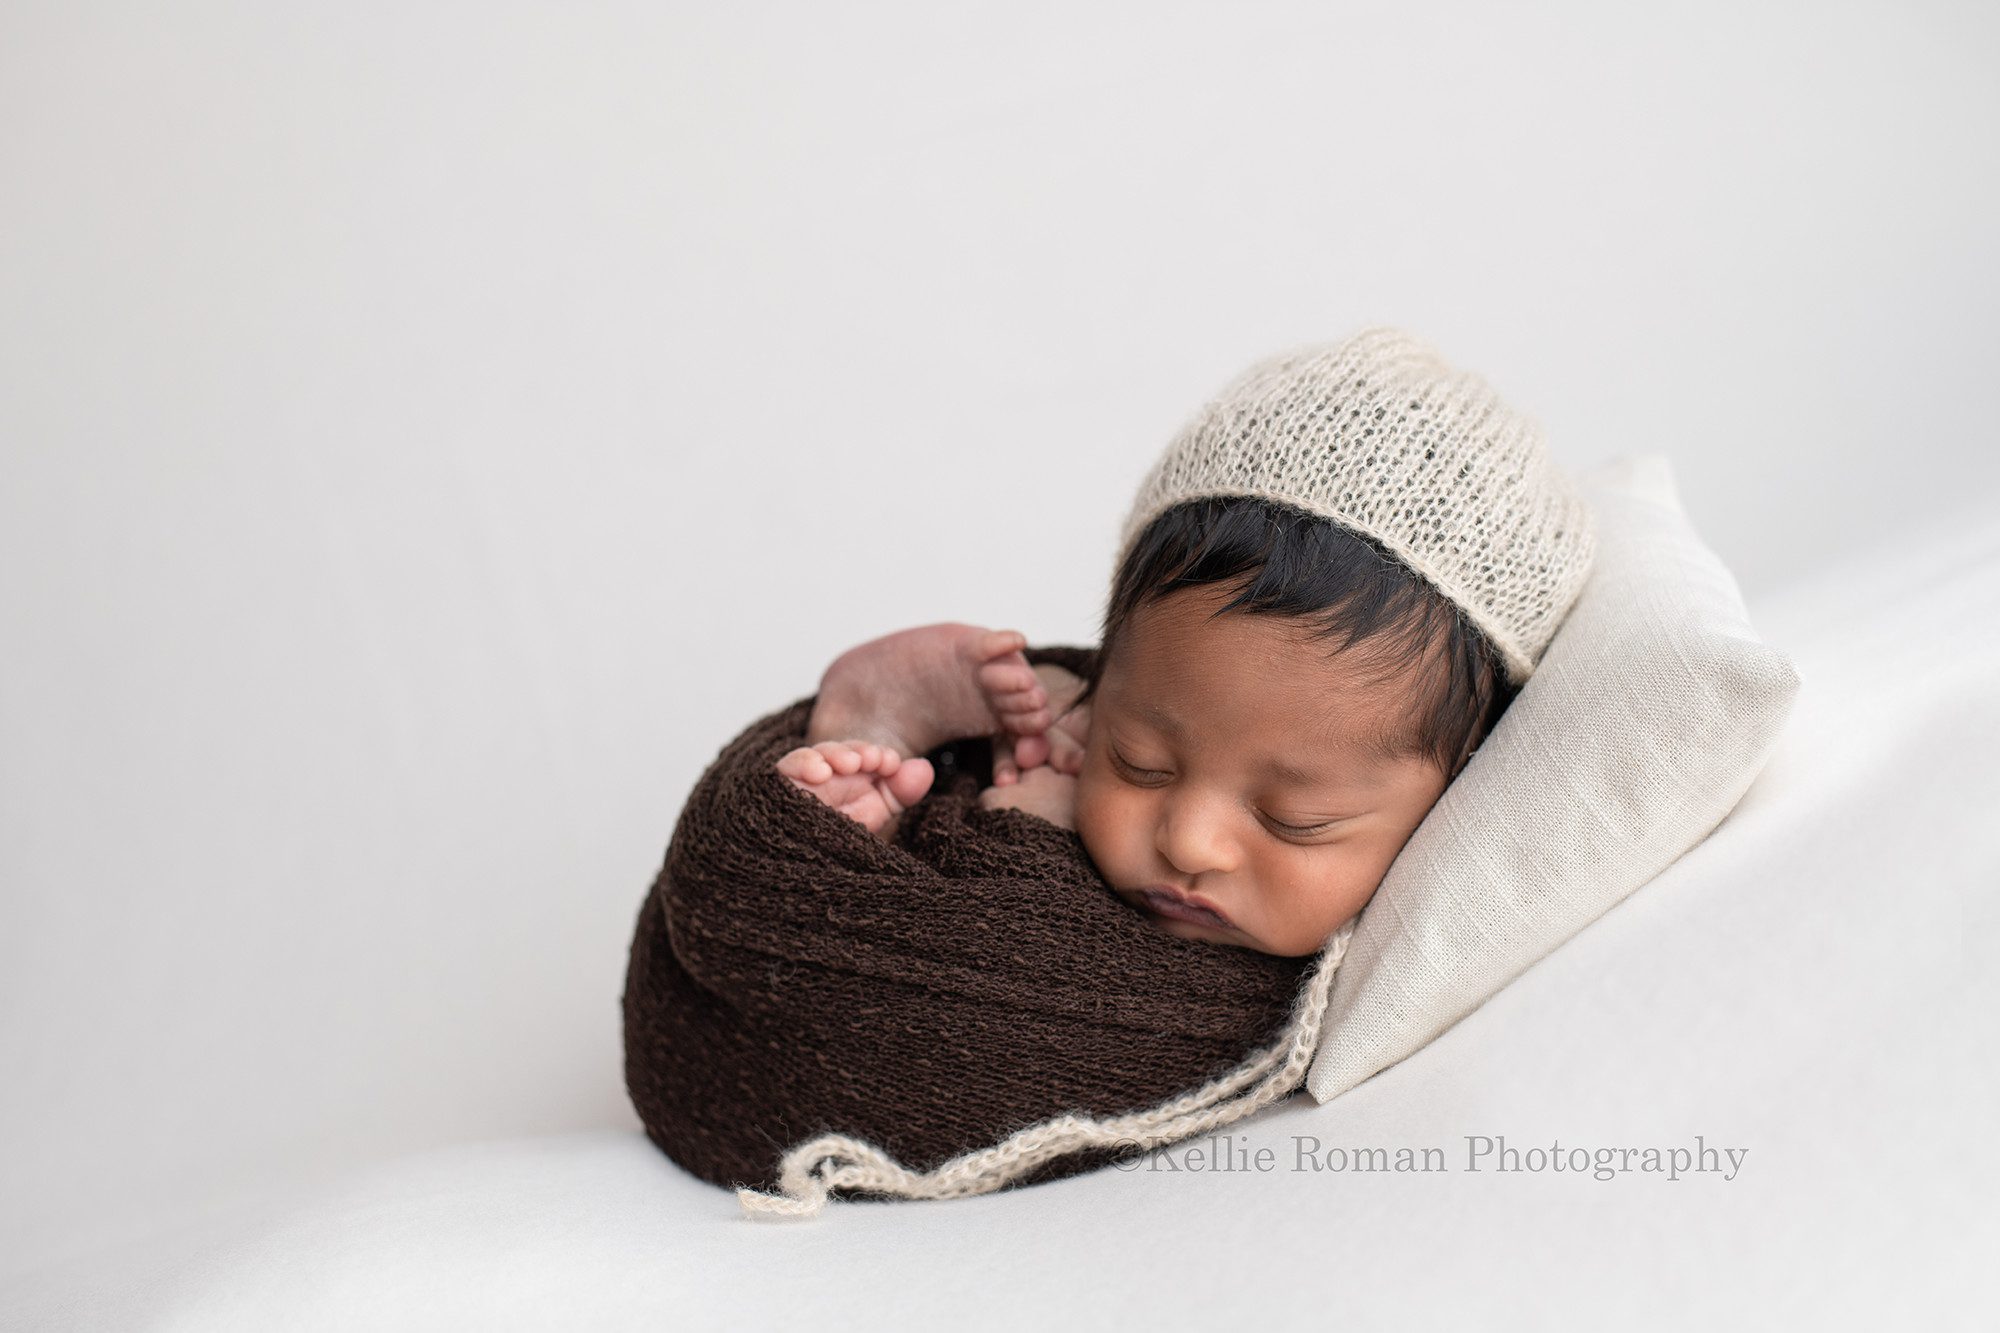 sweet baby boy a newborn baby boy in a milwaukee photographers studio he is wrapped in a brown swaddle fabric and is laying on his back on a cream color fabric. He has a cream color bonnet on, and is head is resting on a cream colored pillow.